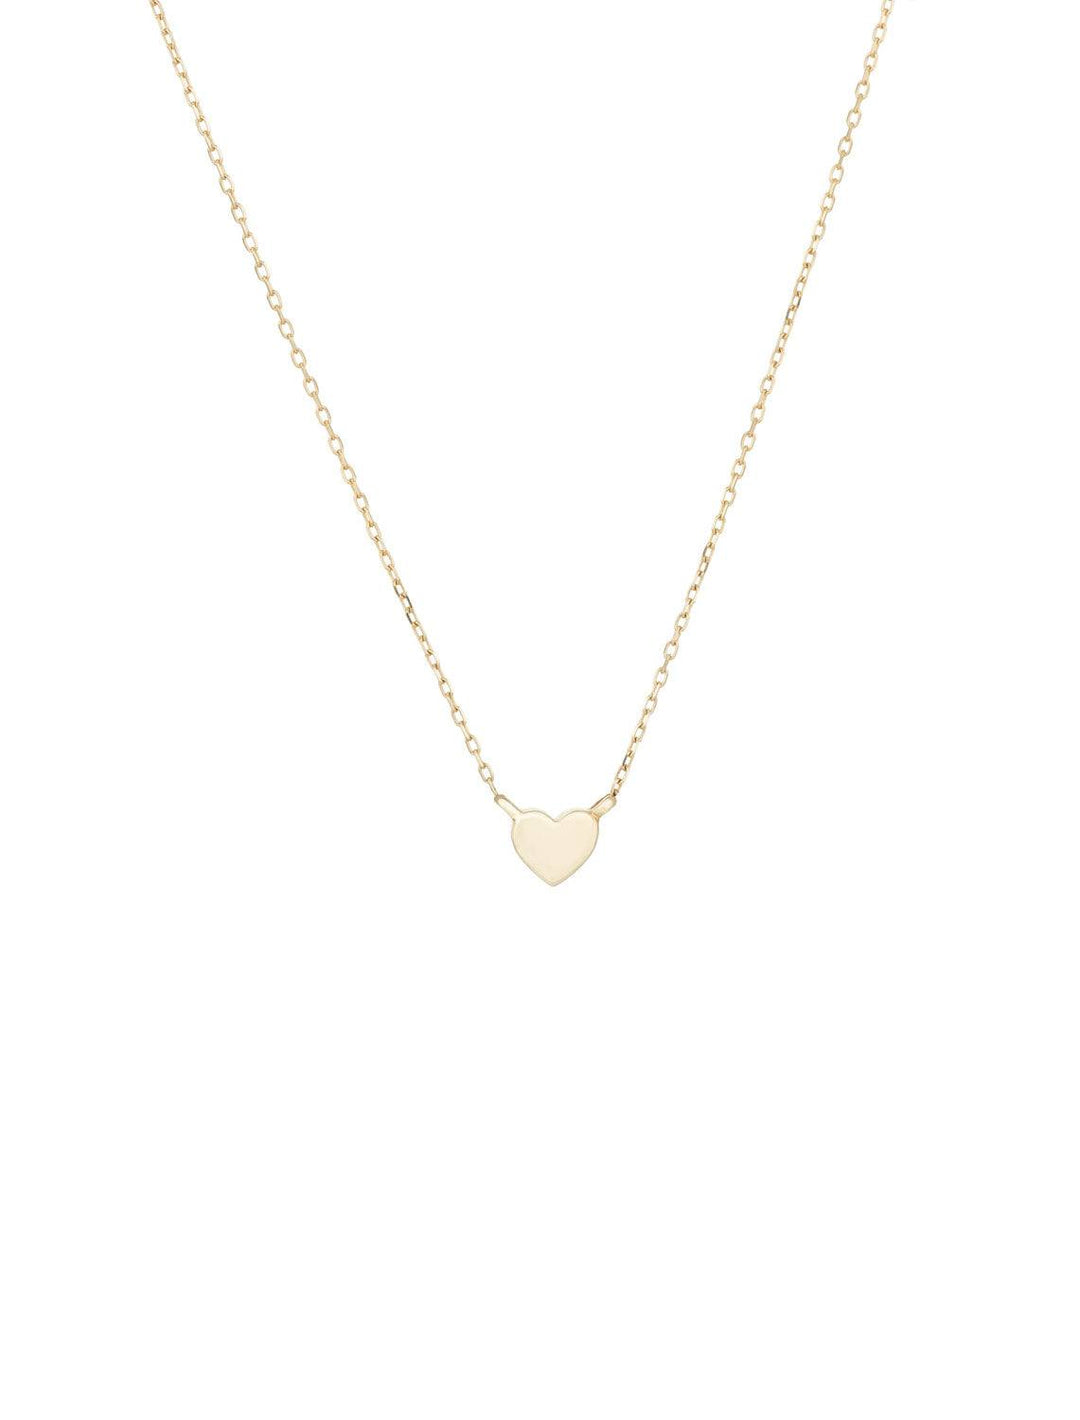 super tiny puffy heart necklace in gold